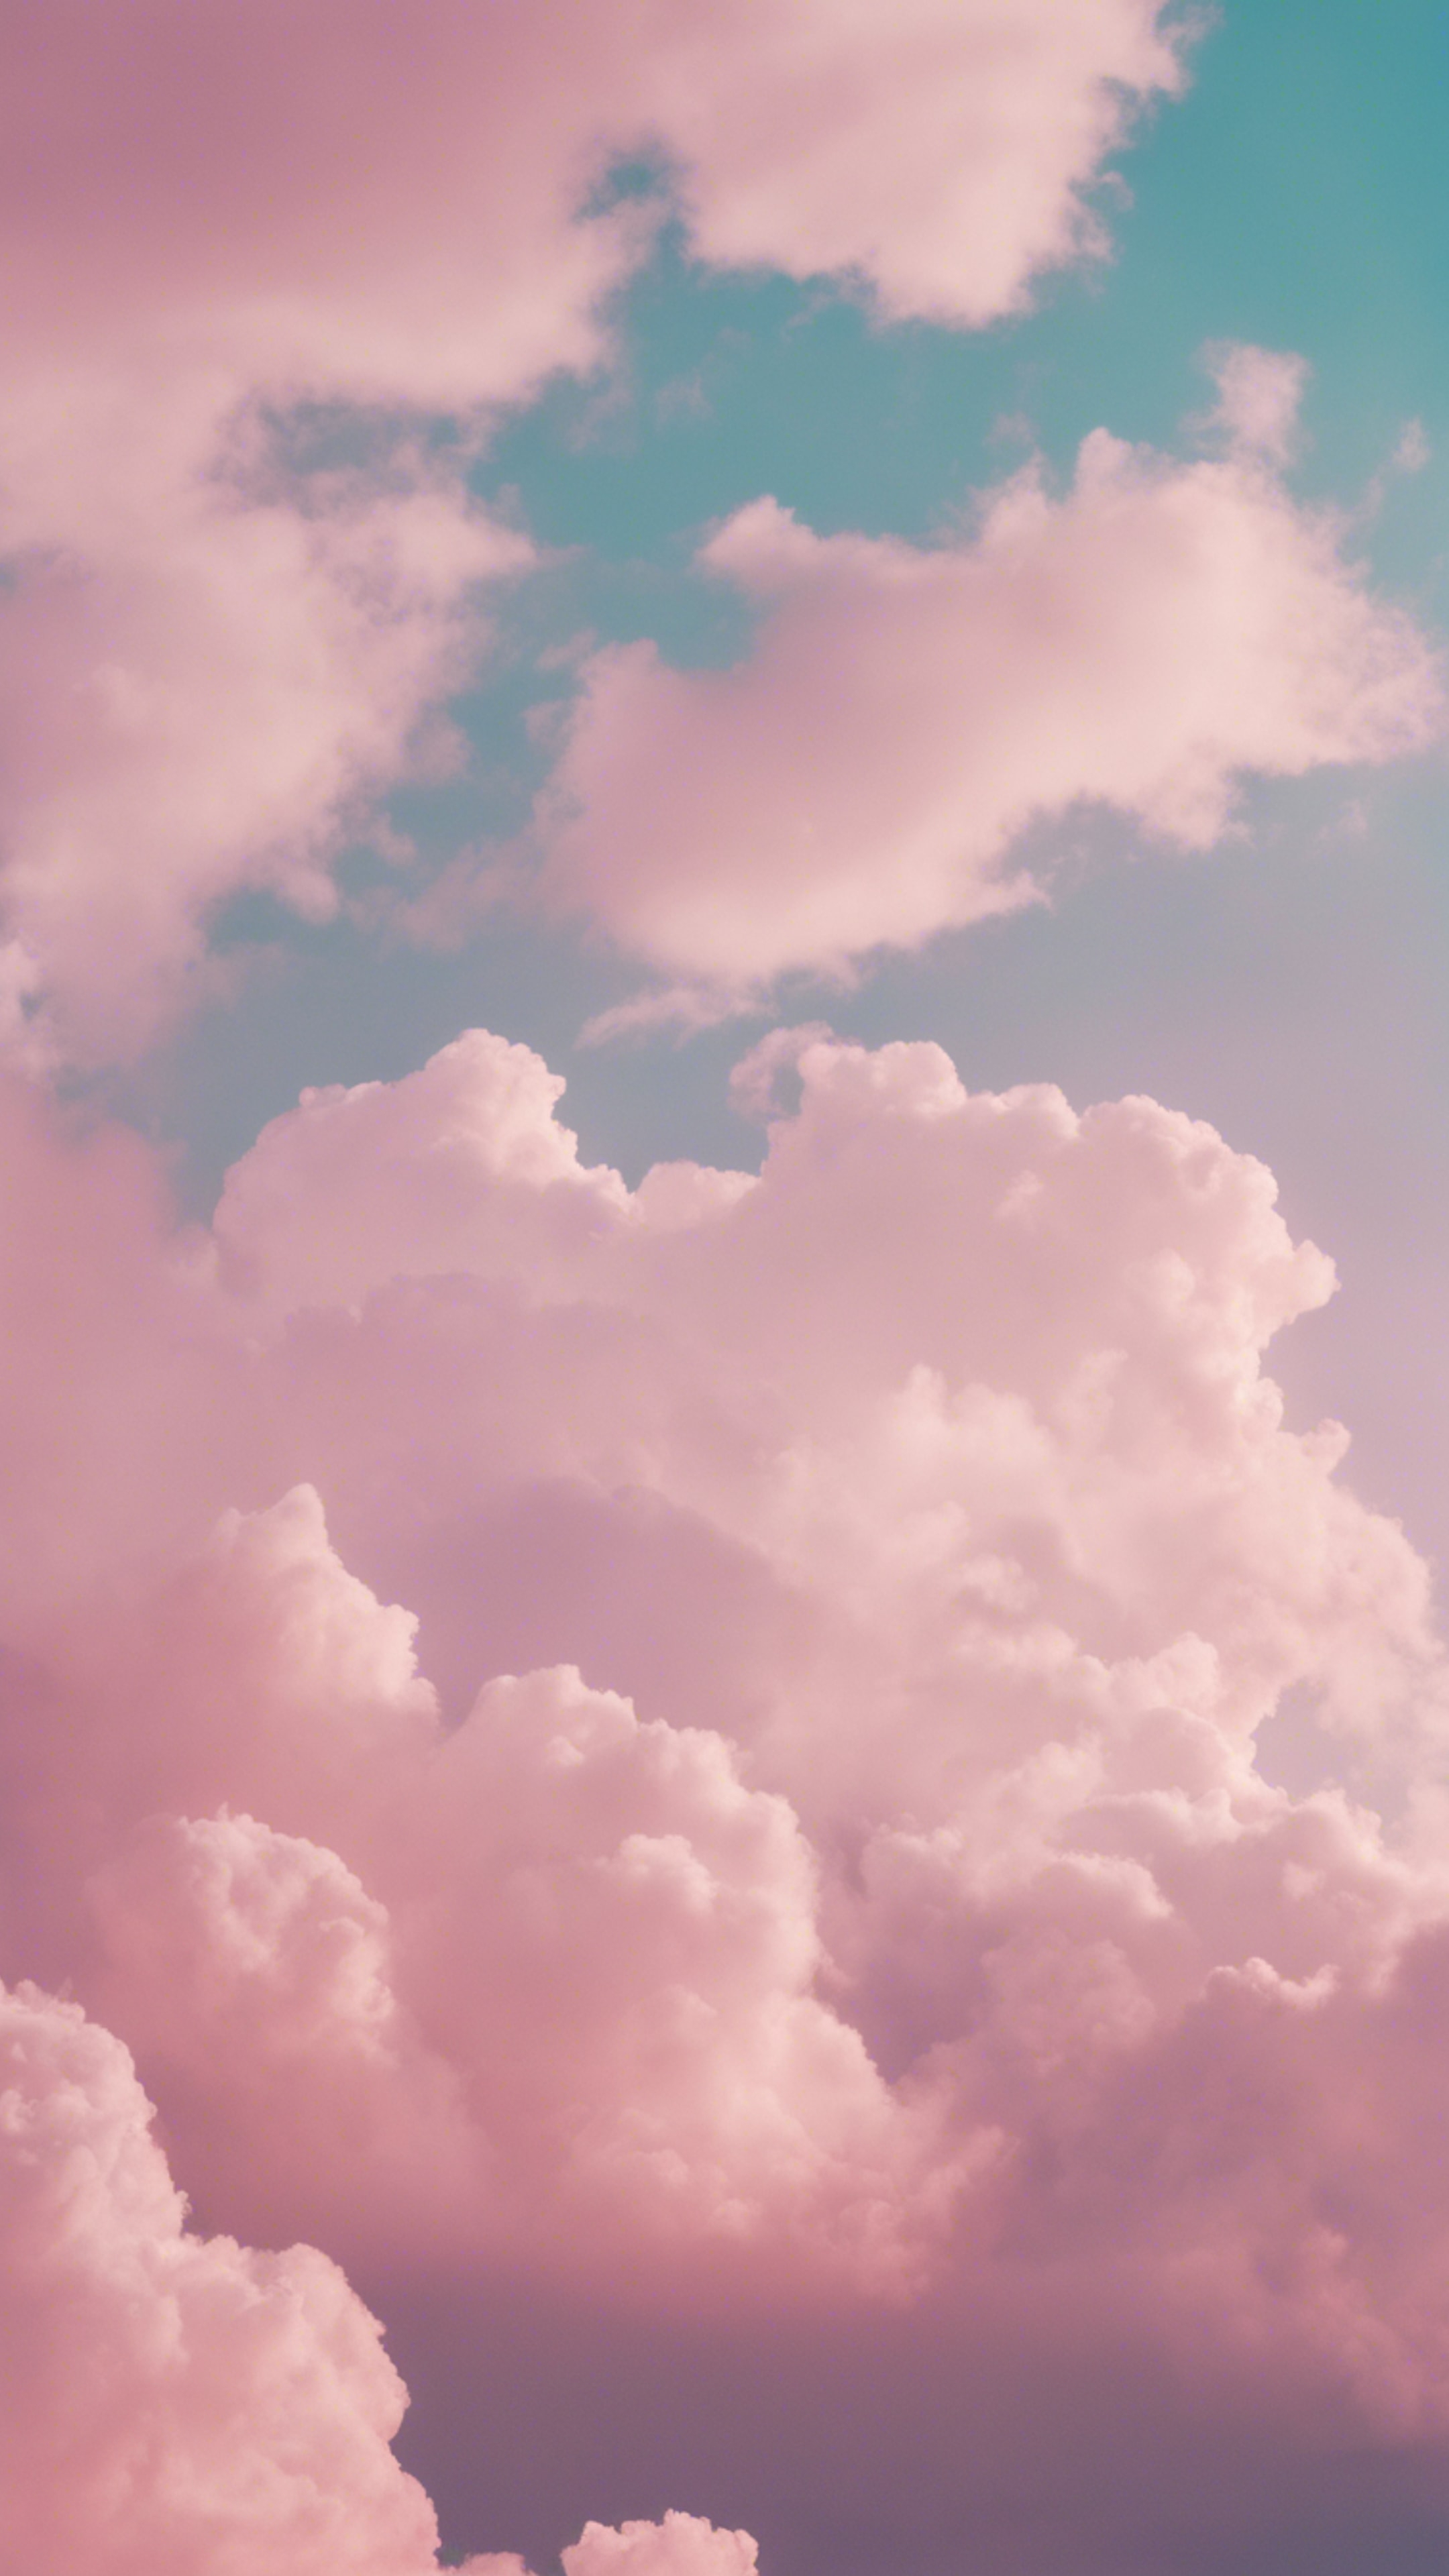 A surreal sky with a mix of pastel tones influenced by Y2K digital aesthetic. טפט[d53cf796167a434cb2de]